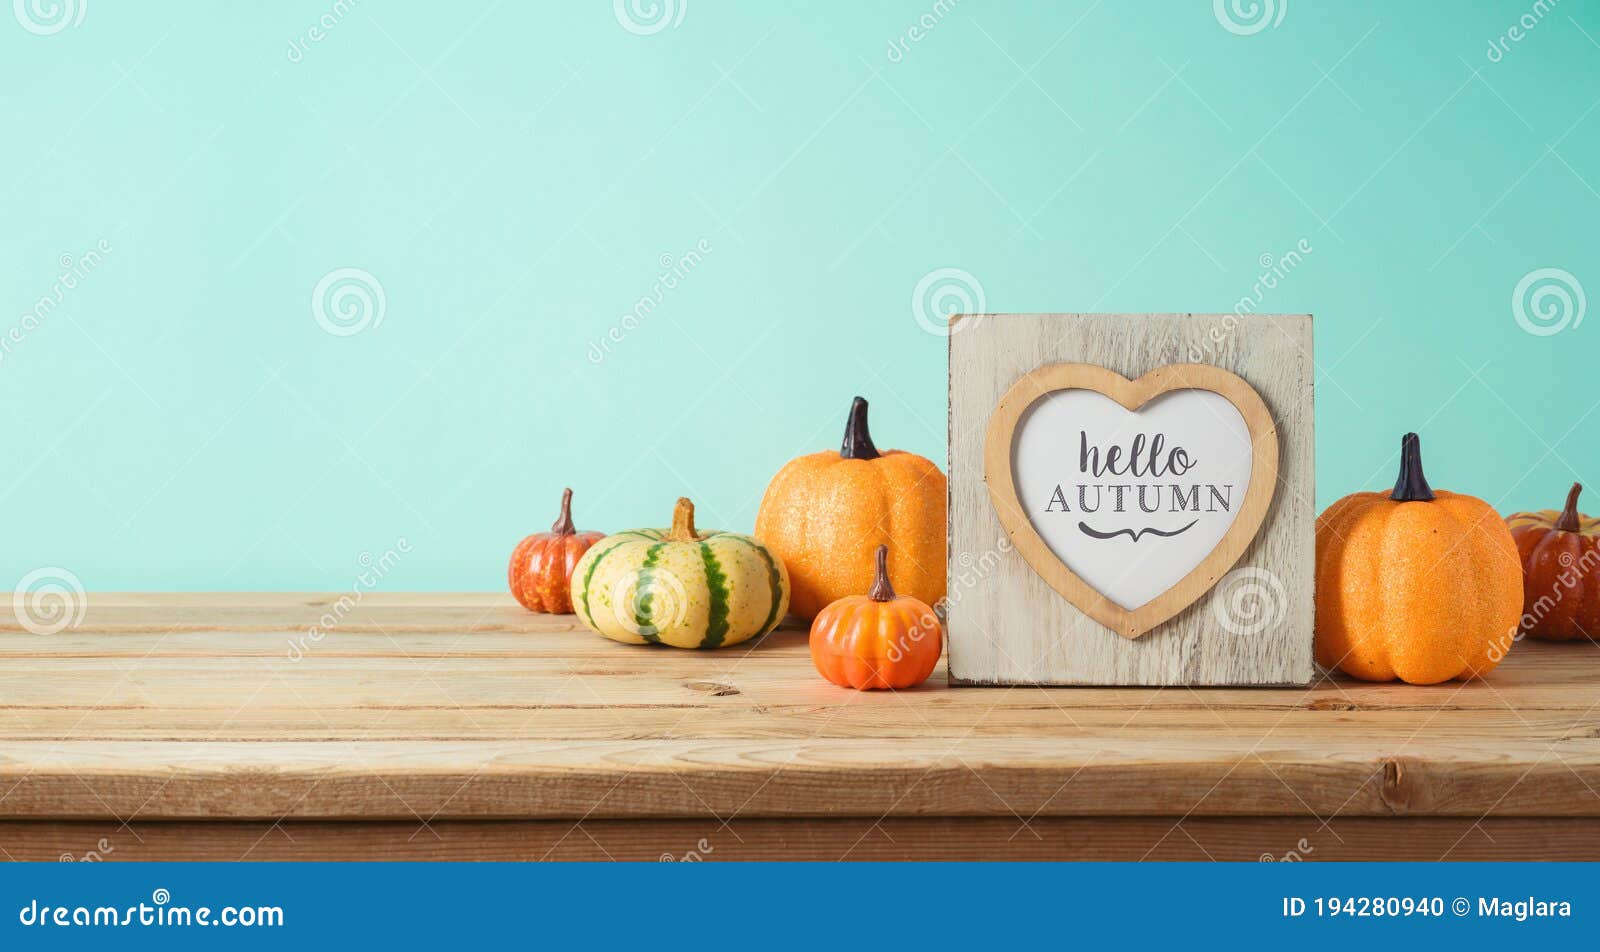 hello autumn concept with photo frame and pumpkin decor on wooden table over blue background. fall season greeting card